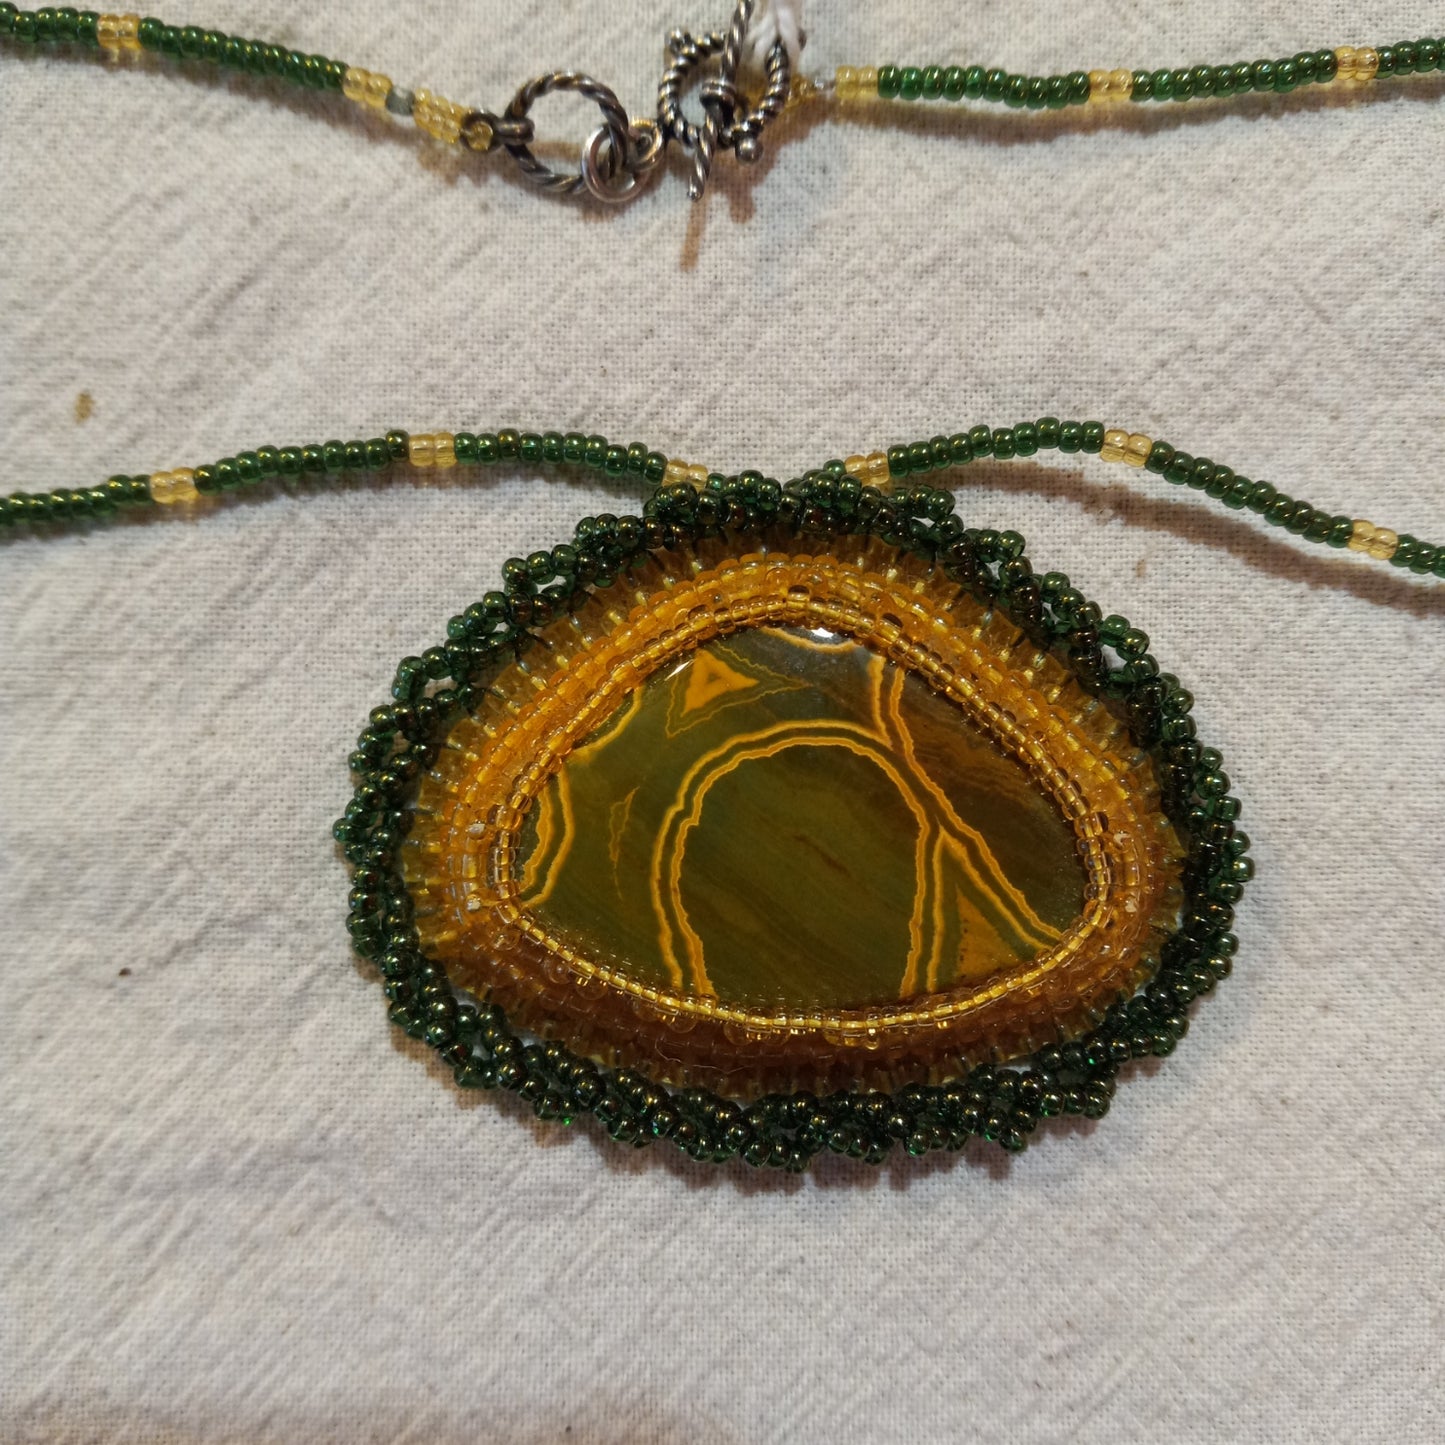 Ocean Jasper Bead Embroidered Cabochon Necklace